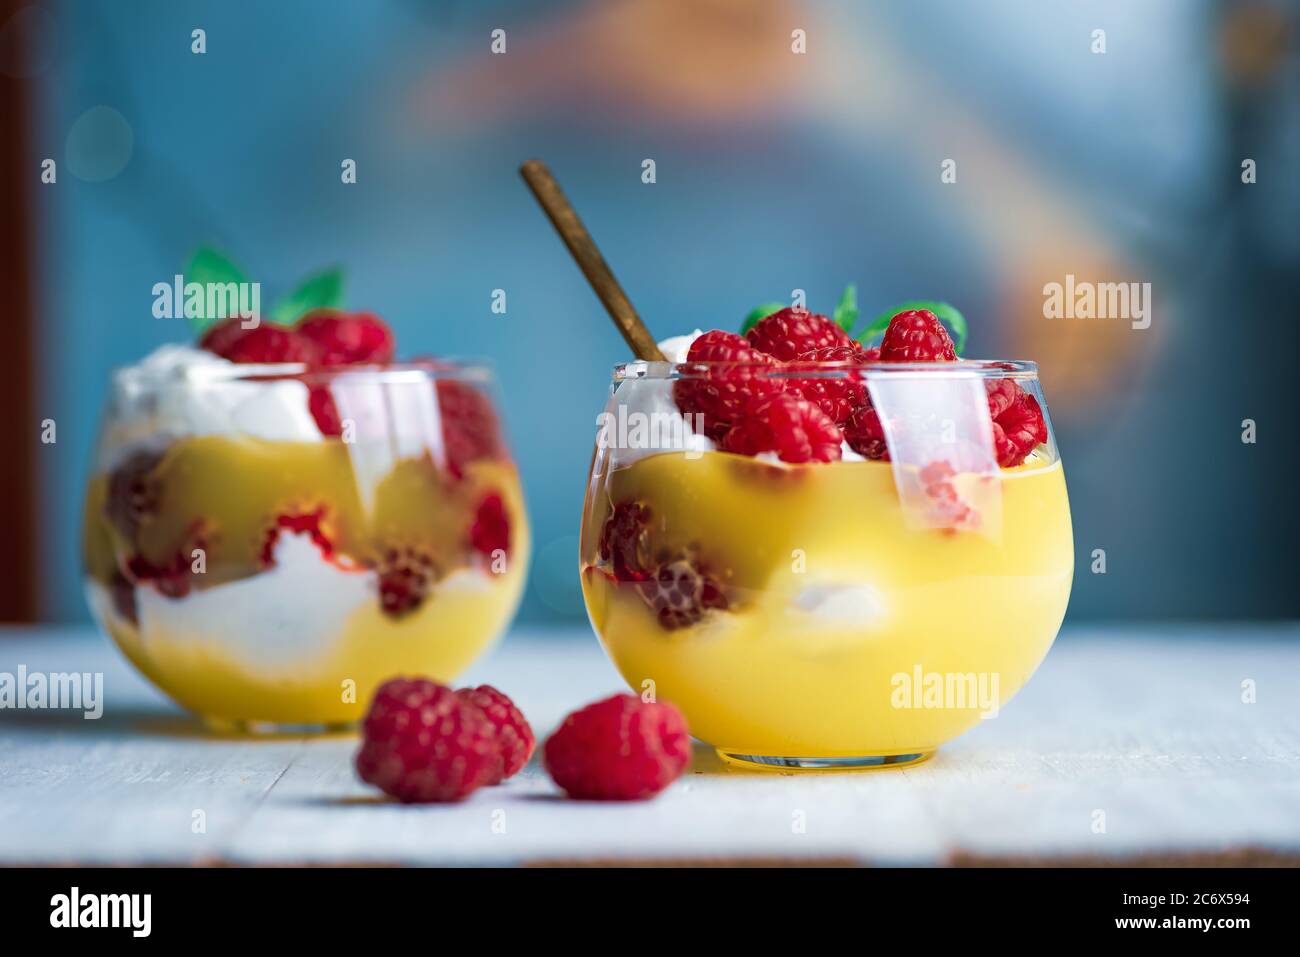 Raspberry fruit parfait with cream in a cup against blue background Stock Photo